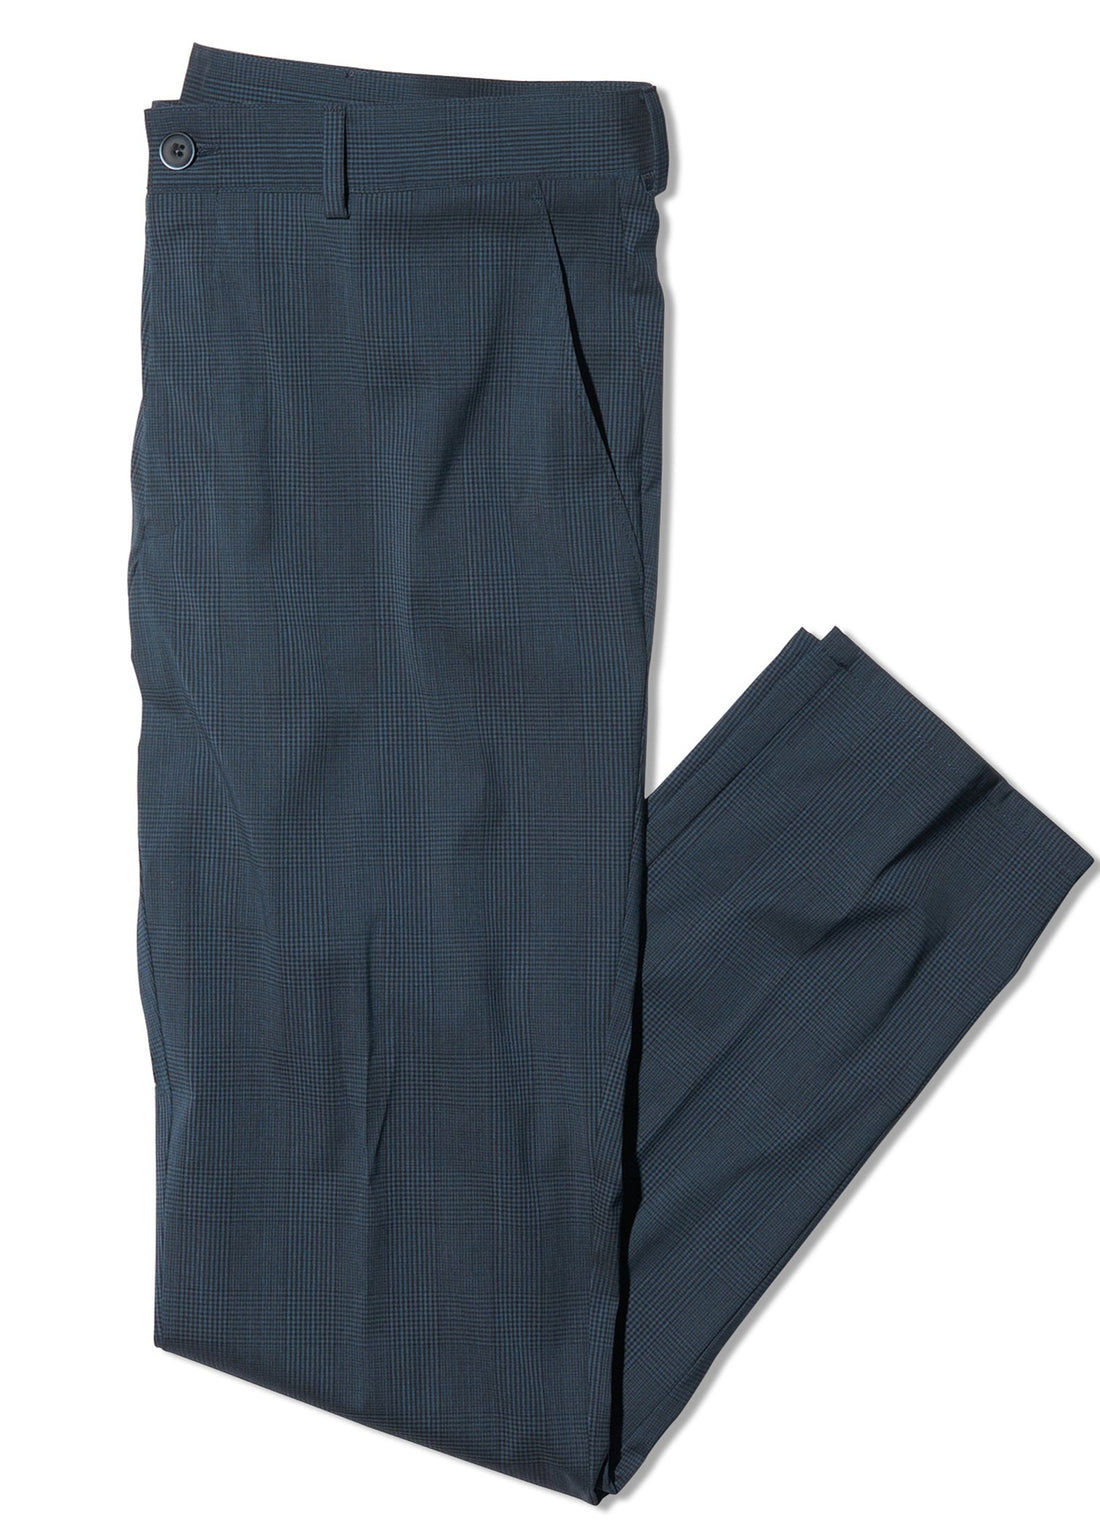 Designed in a modern fit, these comfortable performance wool blend pants are designed to be a versatile and essential piece in your wardrobe. The lightweight technical Super 130s wool blend by the renowned Italian mill Loro Piana is breathable, boasts stretch for extra movement as well as moisture-wicking properties and a soft hand feel.   Crafted in a dark blue plaid, these pants put a spark in your wardrobe.